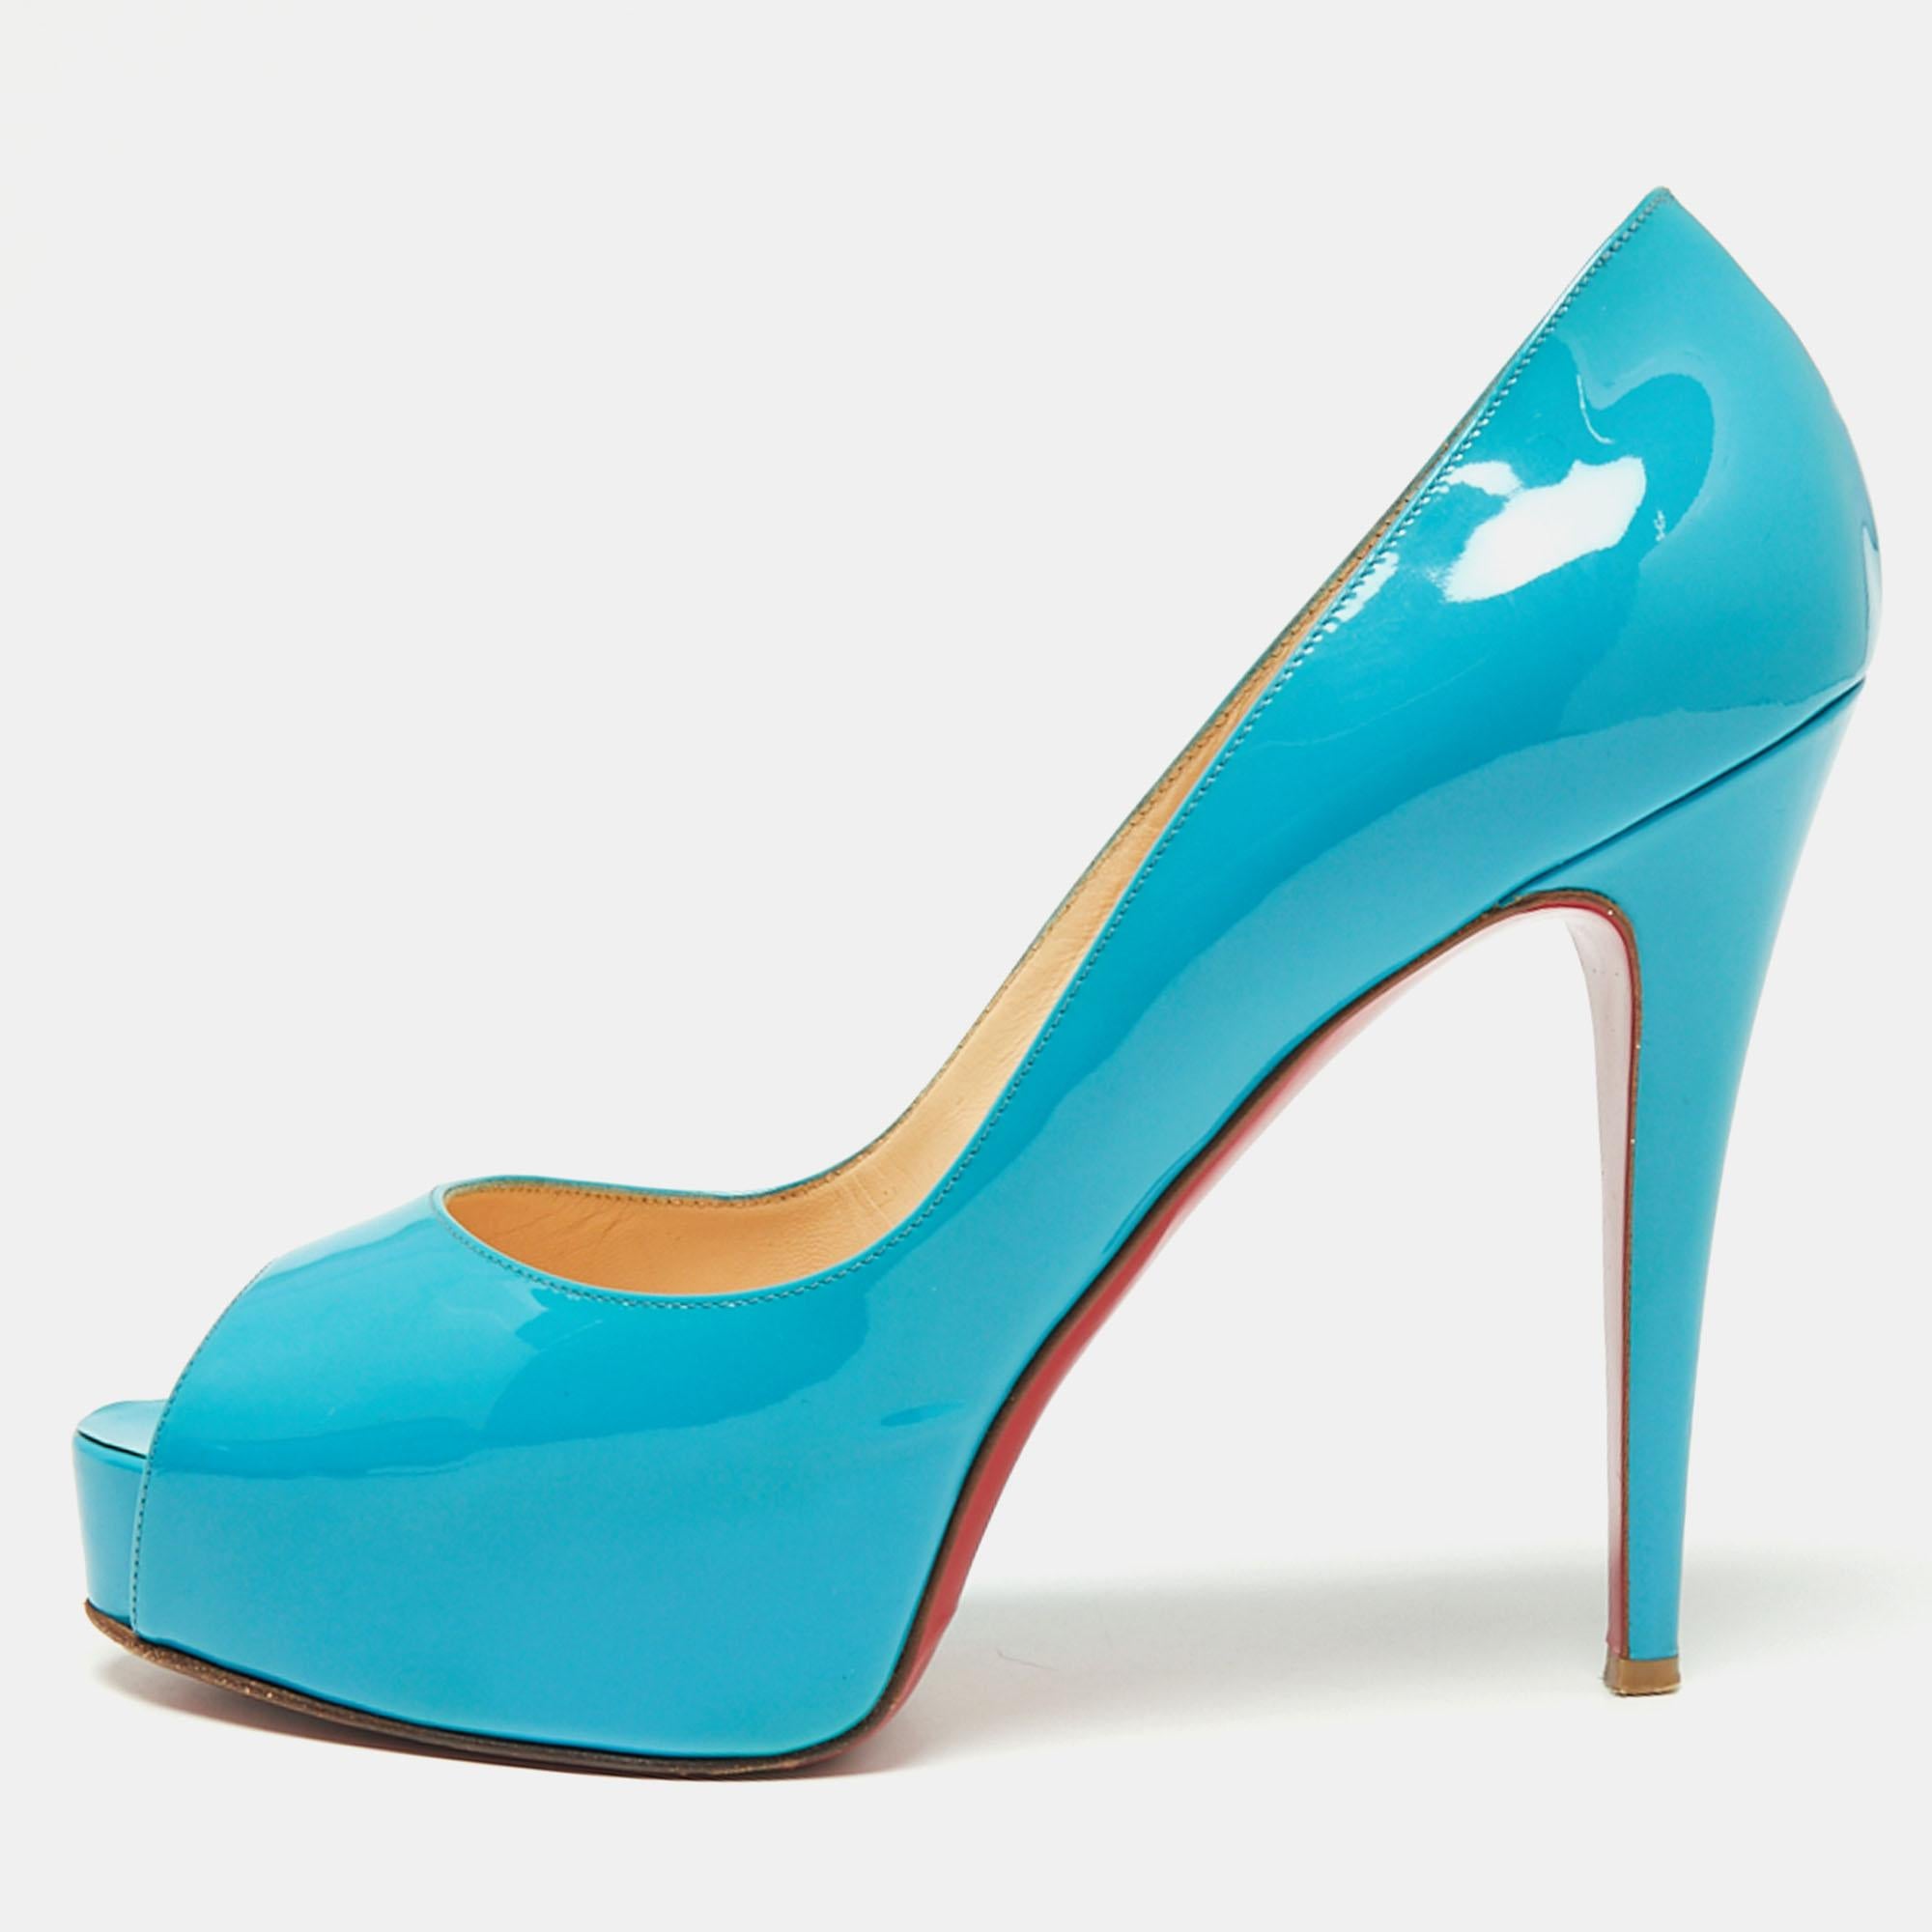 These pumps from Christian Louboutin are meant to be a loved choice. Wonderfully crafted from patent leather and balanced on low platforms and 12.5 cm heels, the blue pumps are high in both style and comfort.